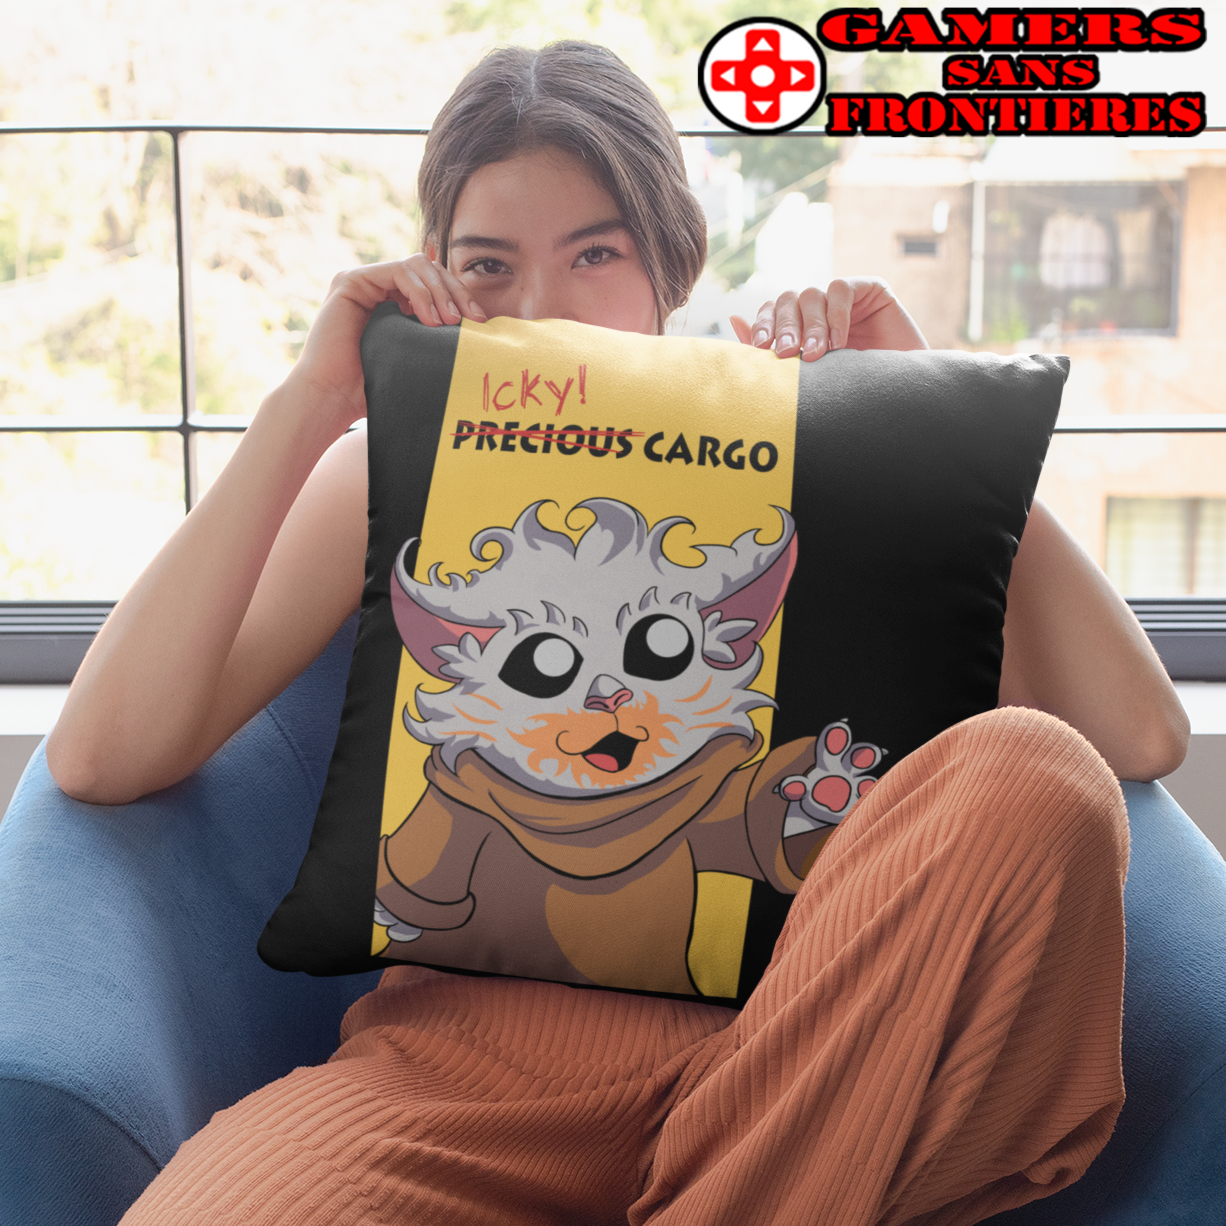 Icky Cargo Pillow - Wisp Campaign